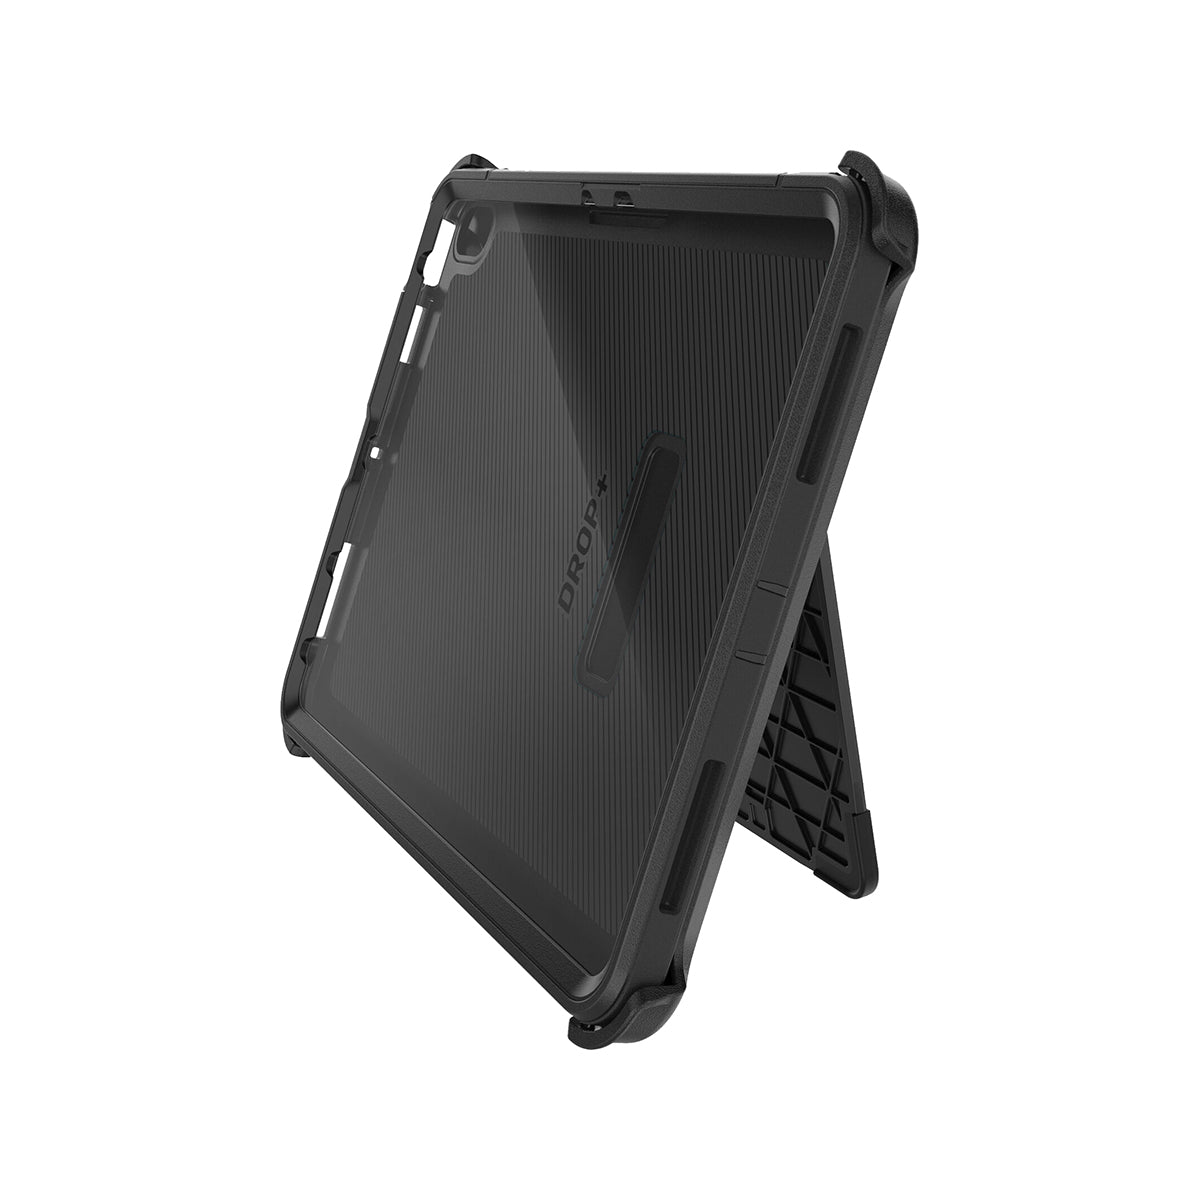 OtterBox Defender Rugged Tablet Case for iPad Air 11